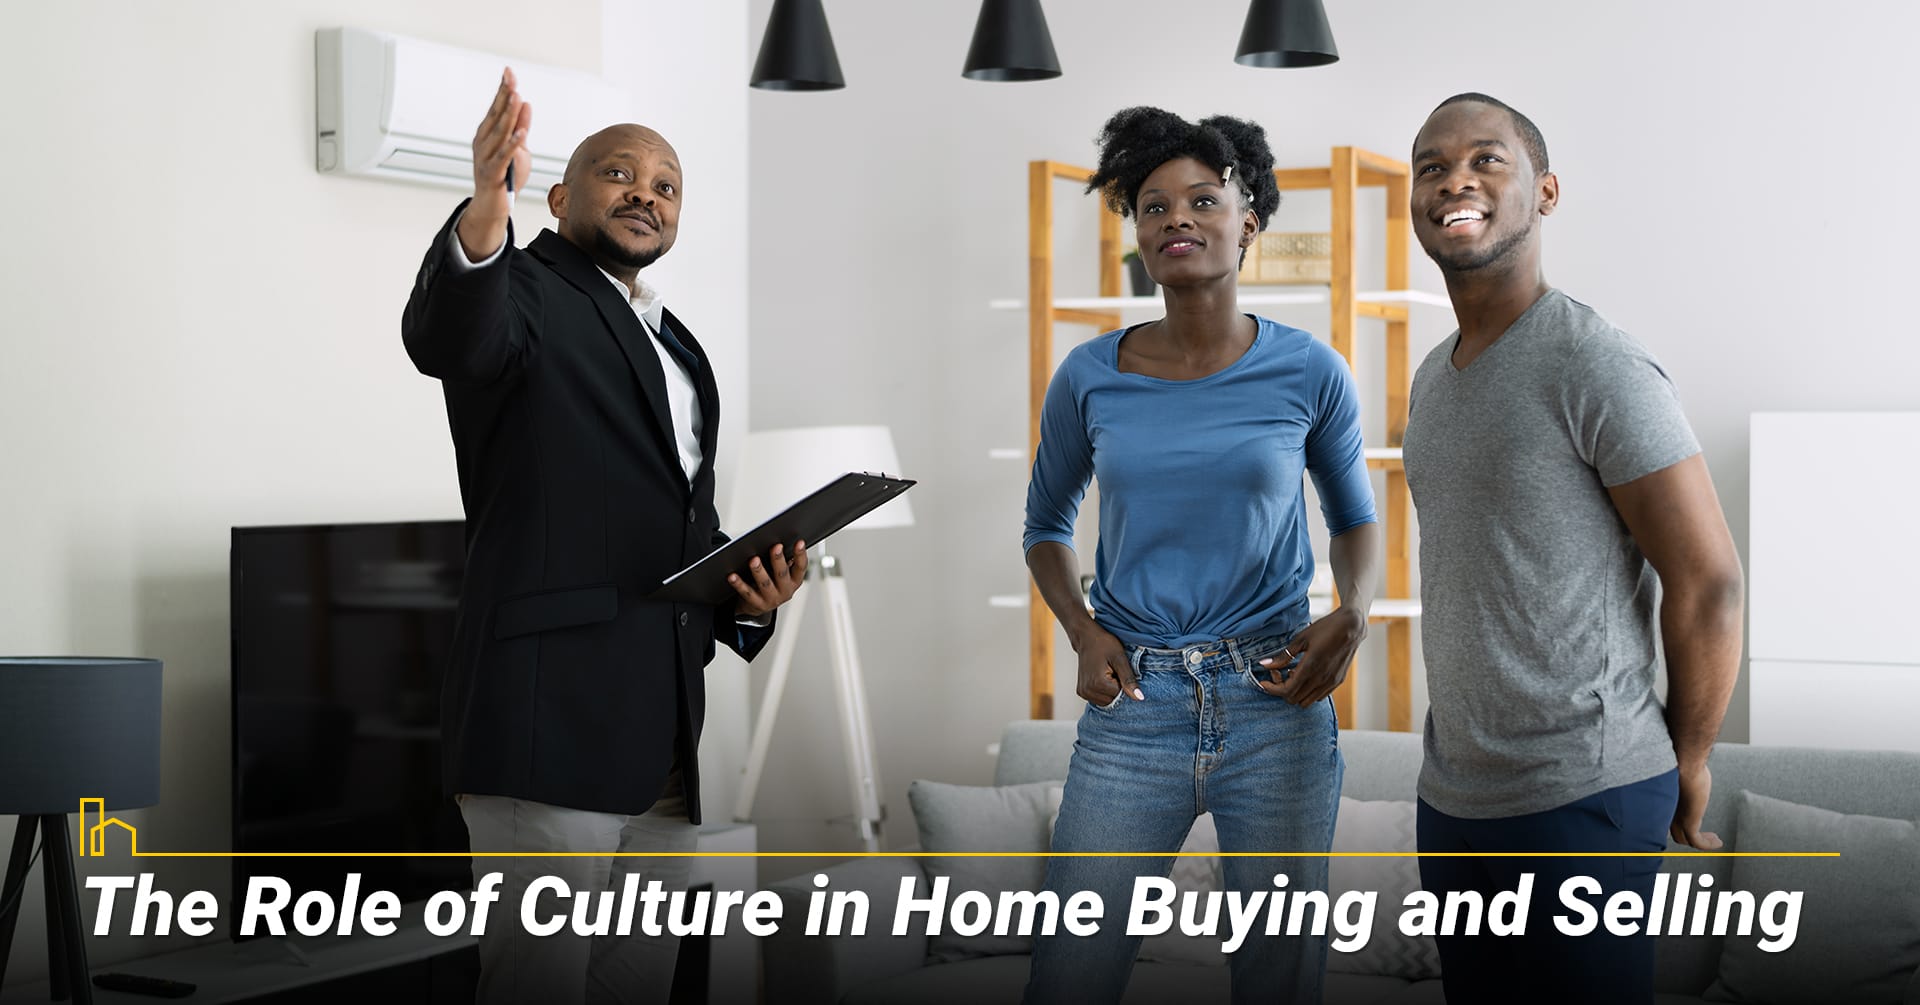 The Role of Culture in Home Buying and Selling